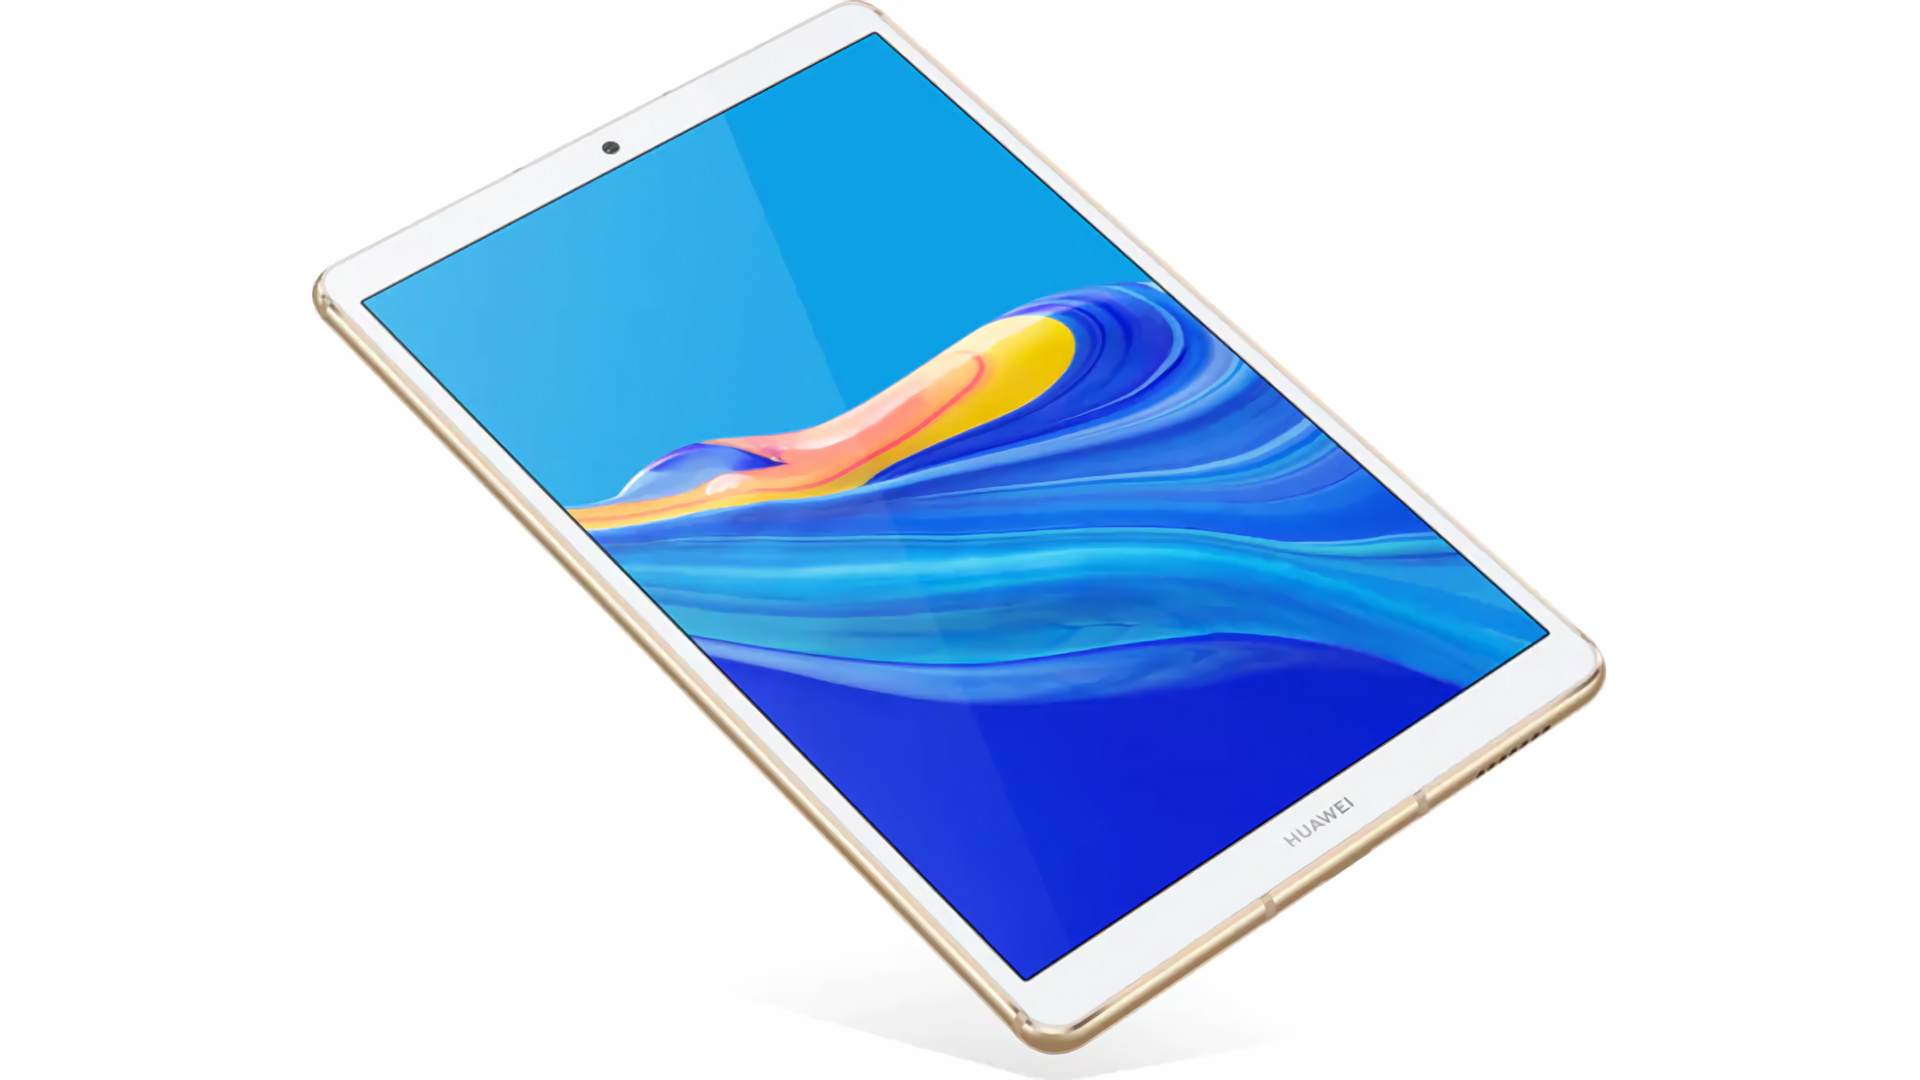 Official render of the Huawei MediaPad M6 8.4-inch